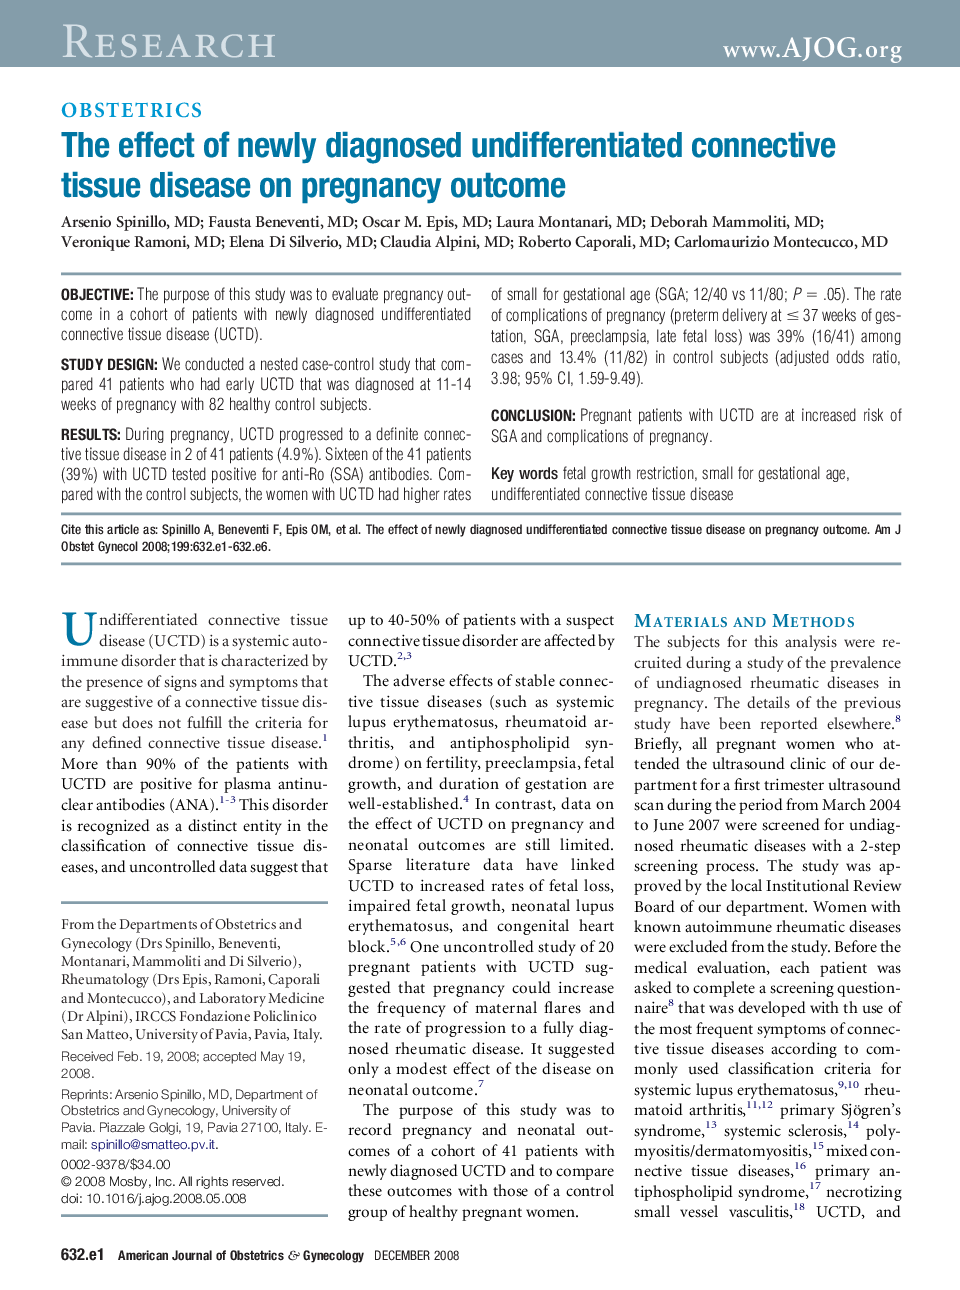 The effect of newly diagnosed undifferentiated connective tissue disease on pregnancy outcome